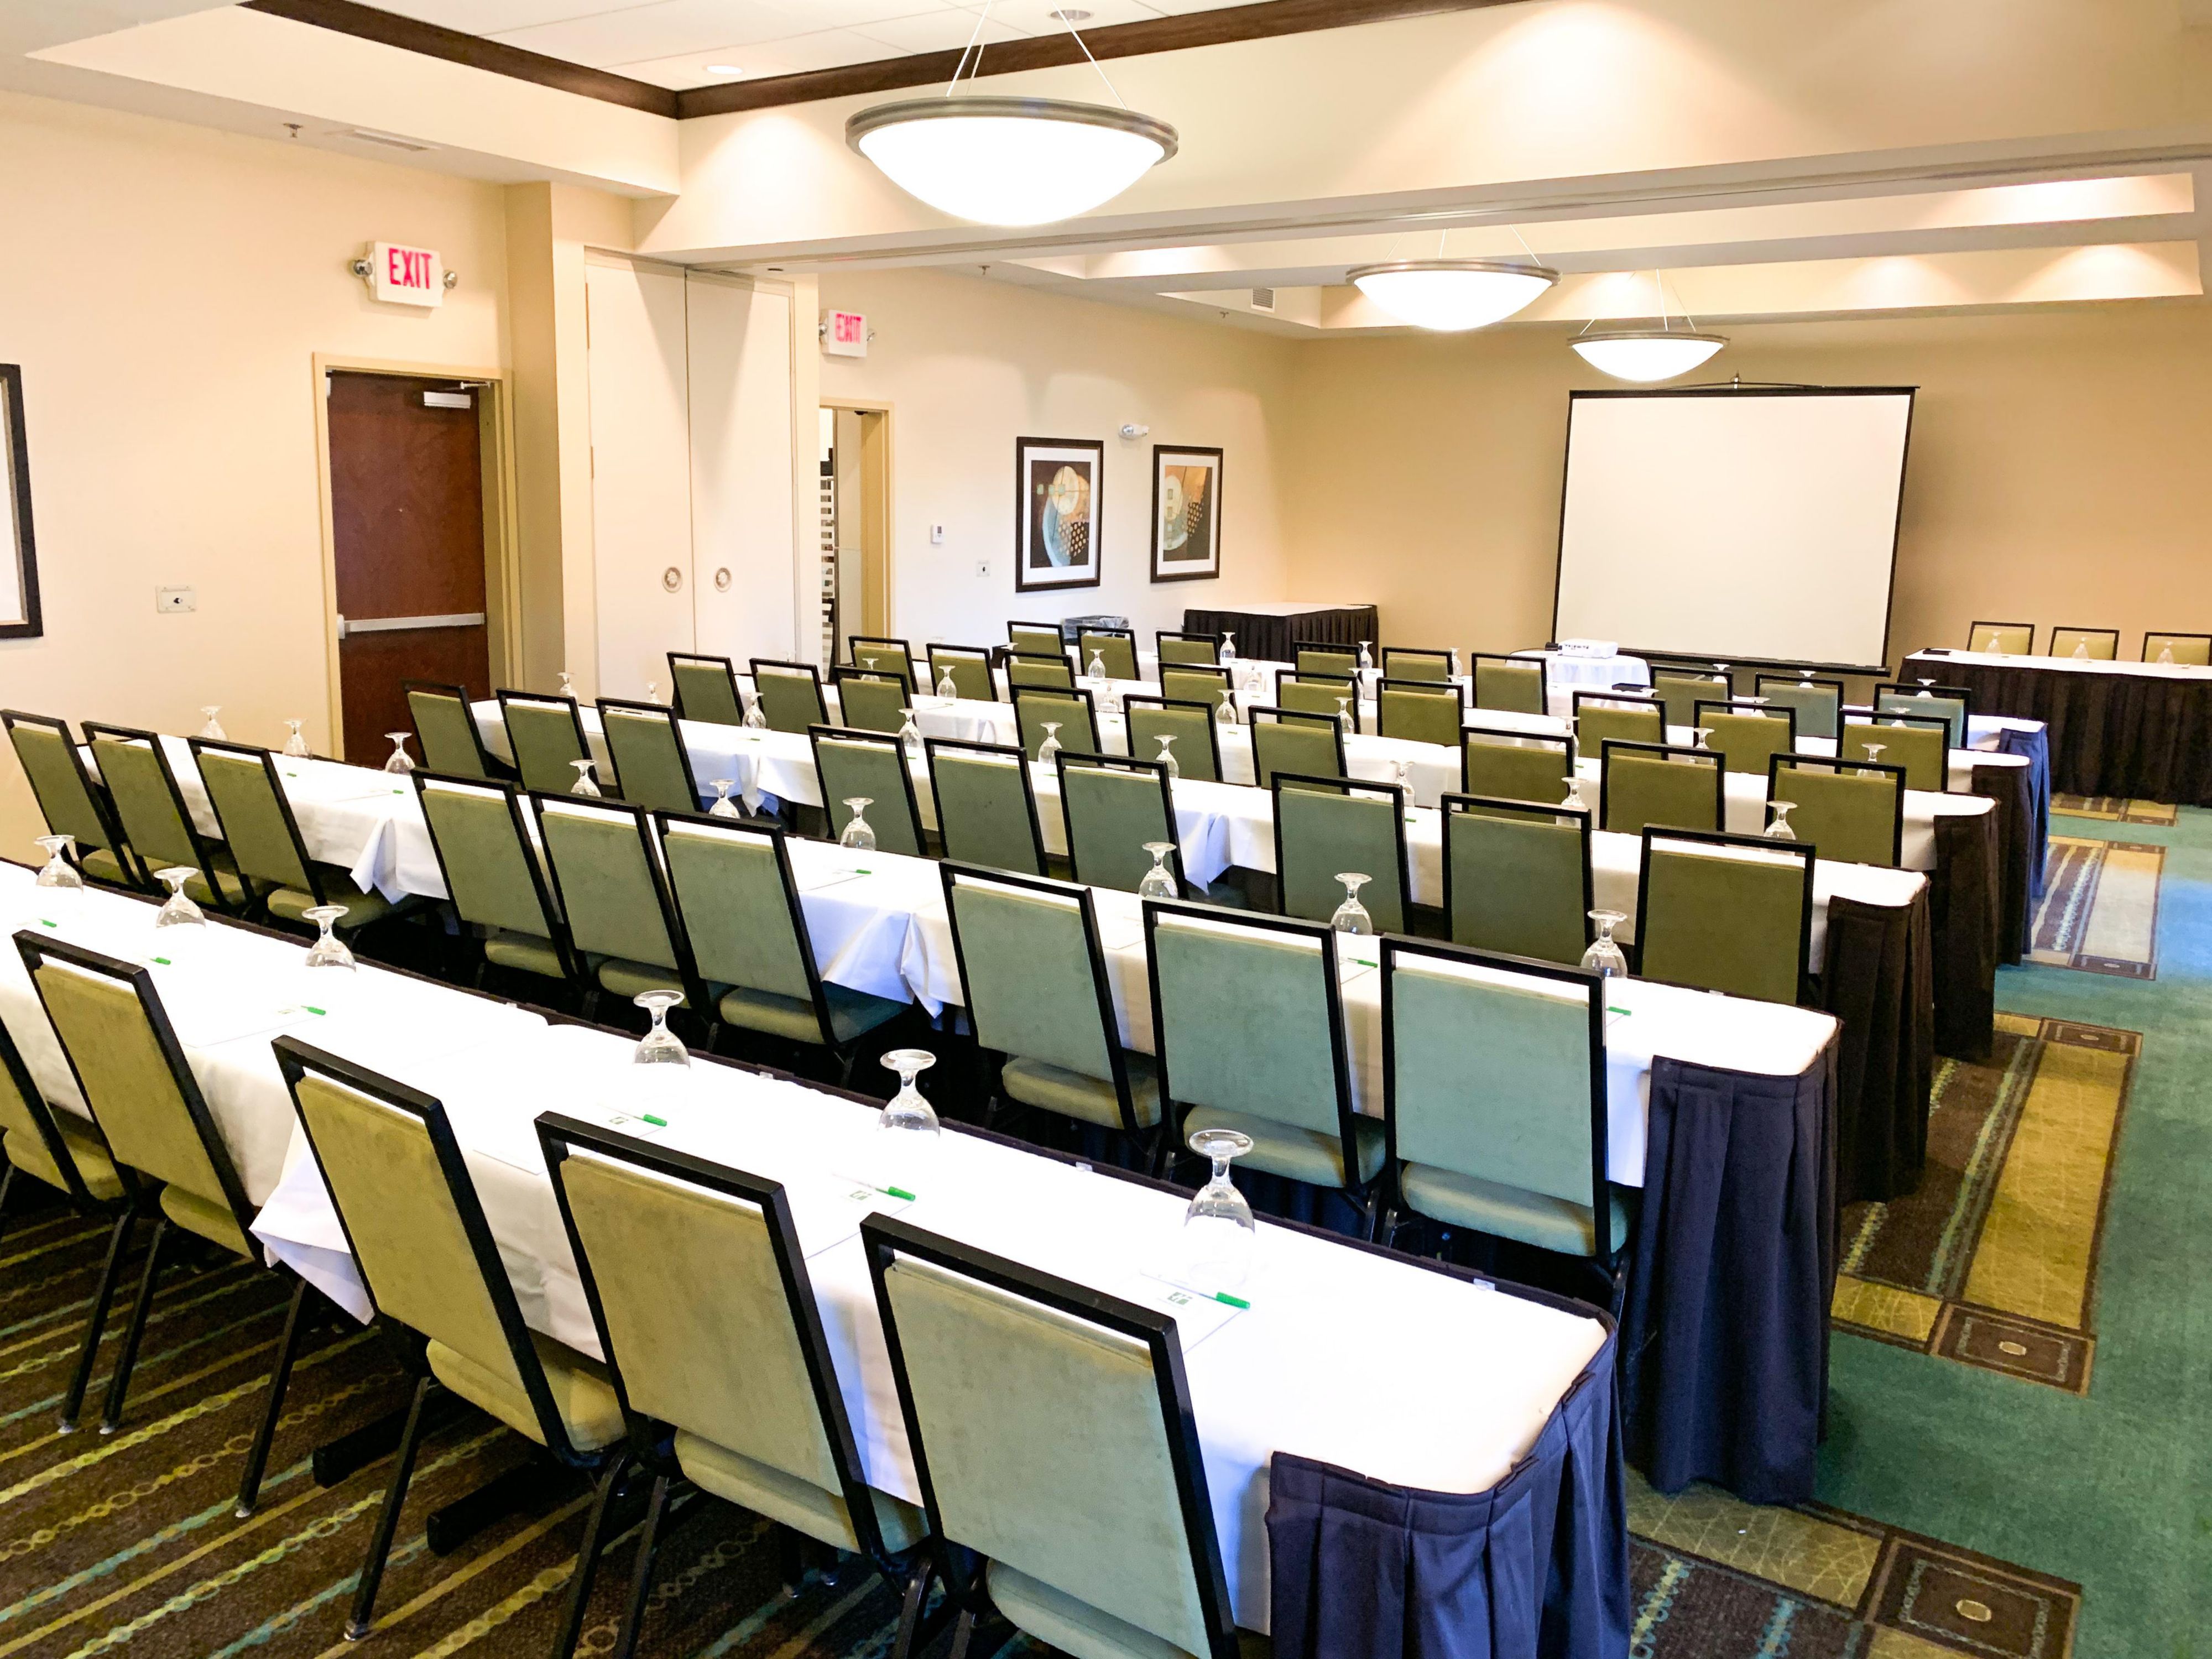 We have 2,100 sq. ft. of onsite meeting space which can host up to 225 people.